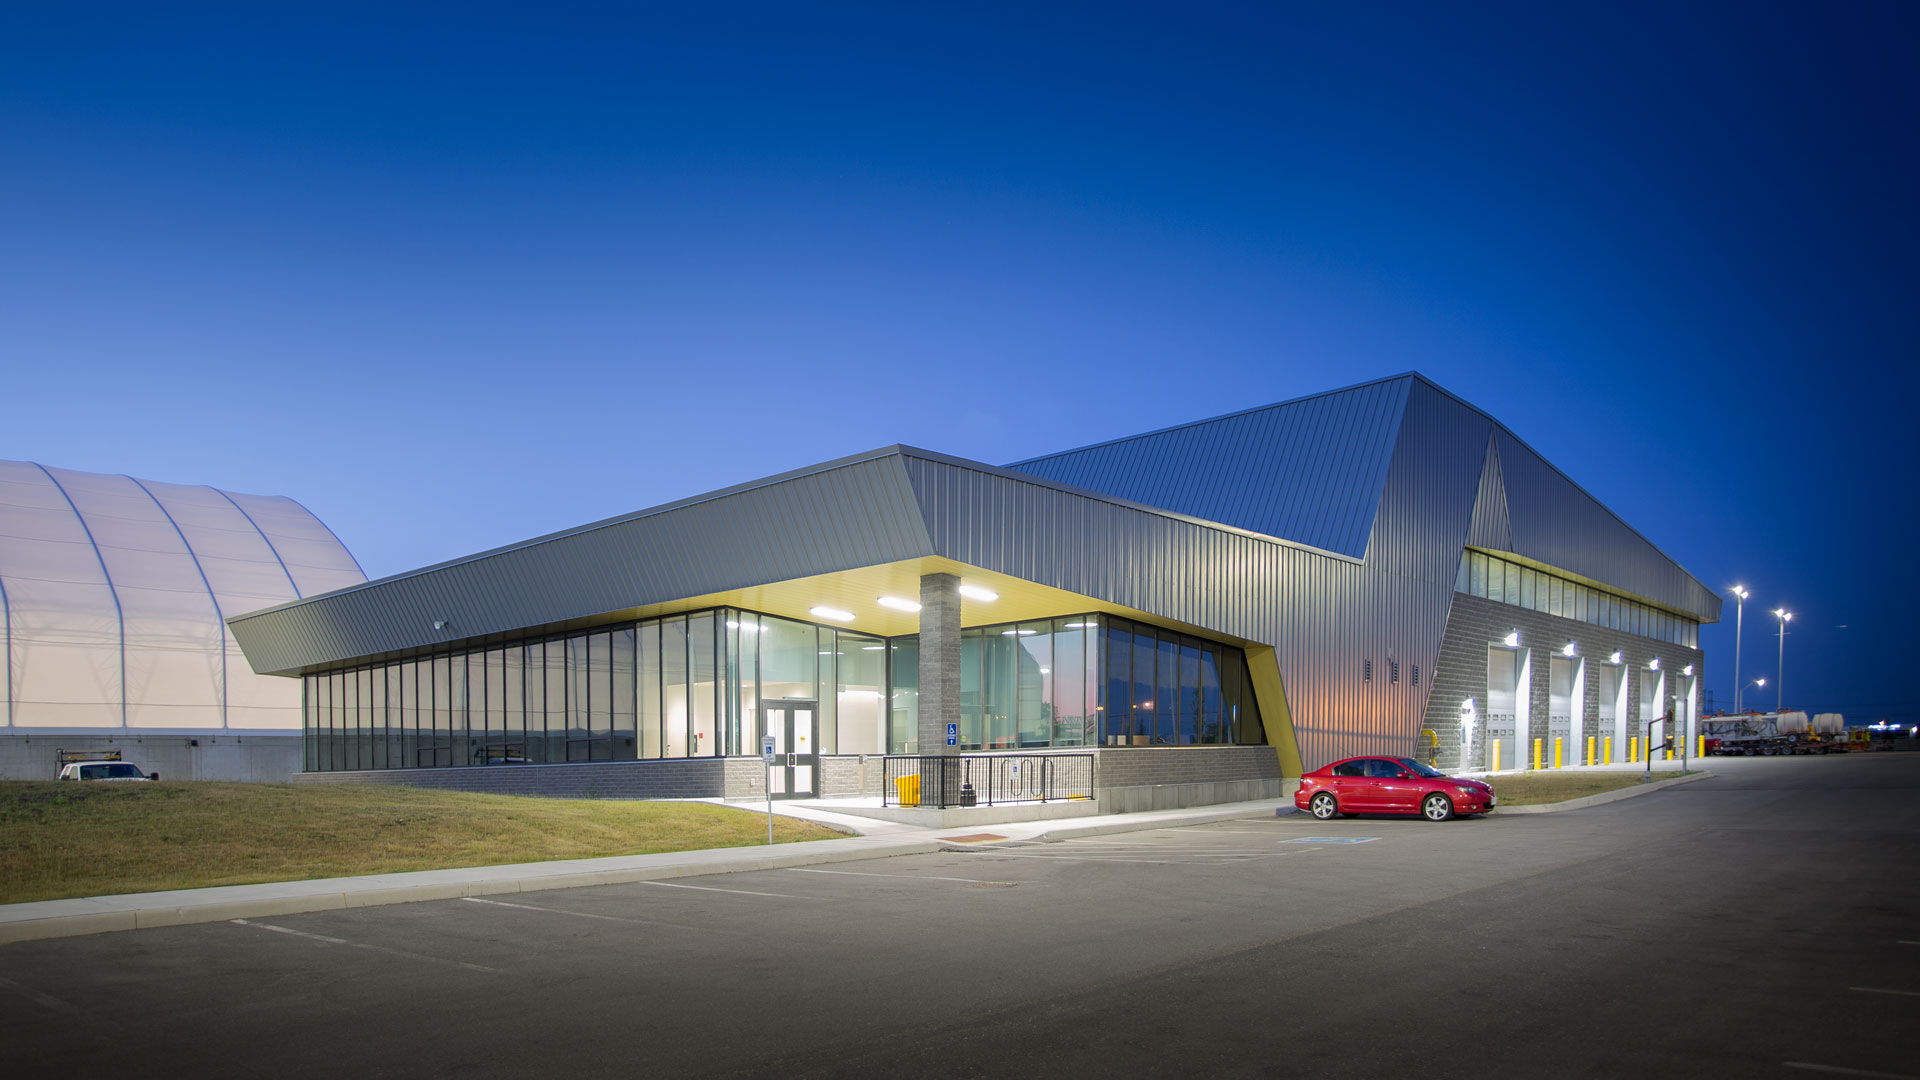 Exterior night photo of the facility with the parking lot in the front